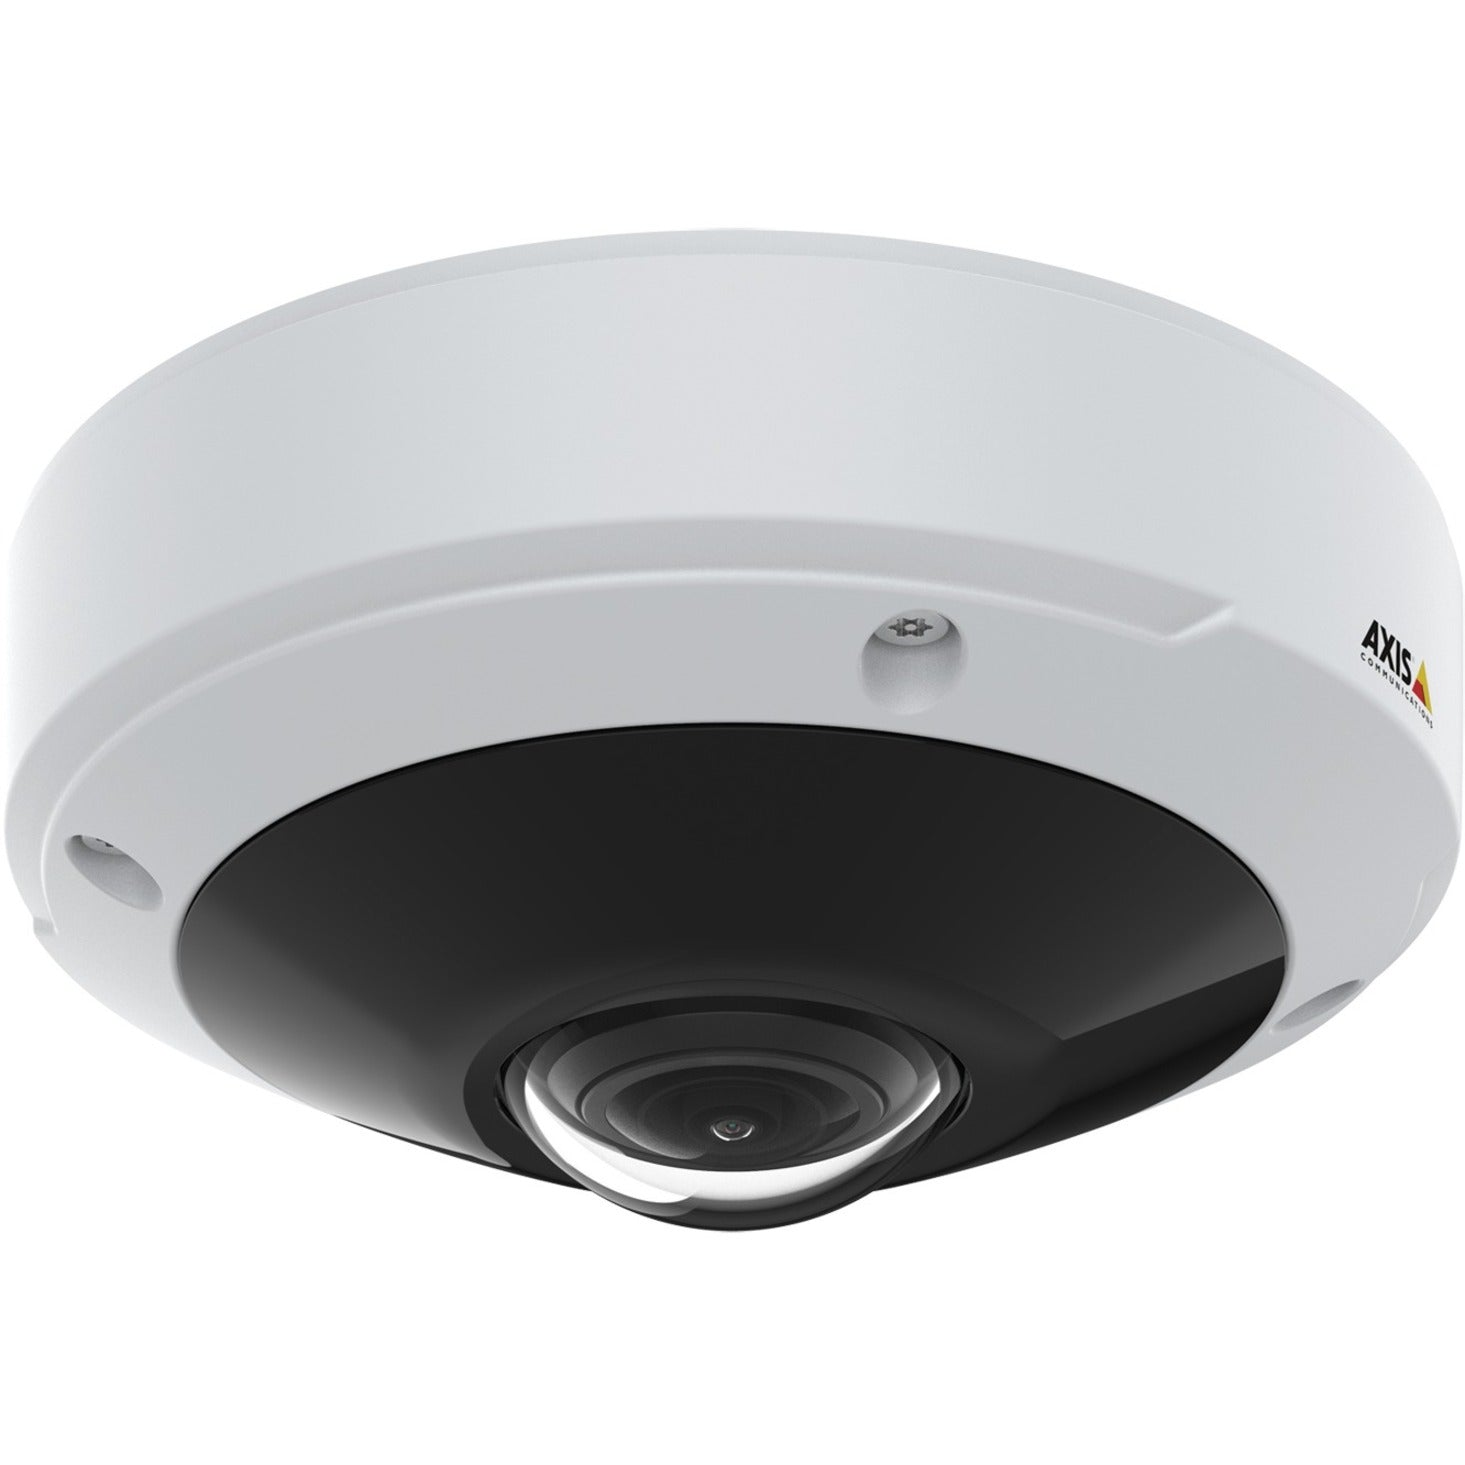 AXIS 02109-001 M3057-PLVE Mk II Network Camera, 6 Megapixel Indoor/Outdoor Dome, Color, PTZ, Motion Detection, SD Card Local Storage, HTTPS Encryption, Password Protection, Privacy Masking, Auto Gain Control, Day/Night, Tampering Alarm